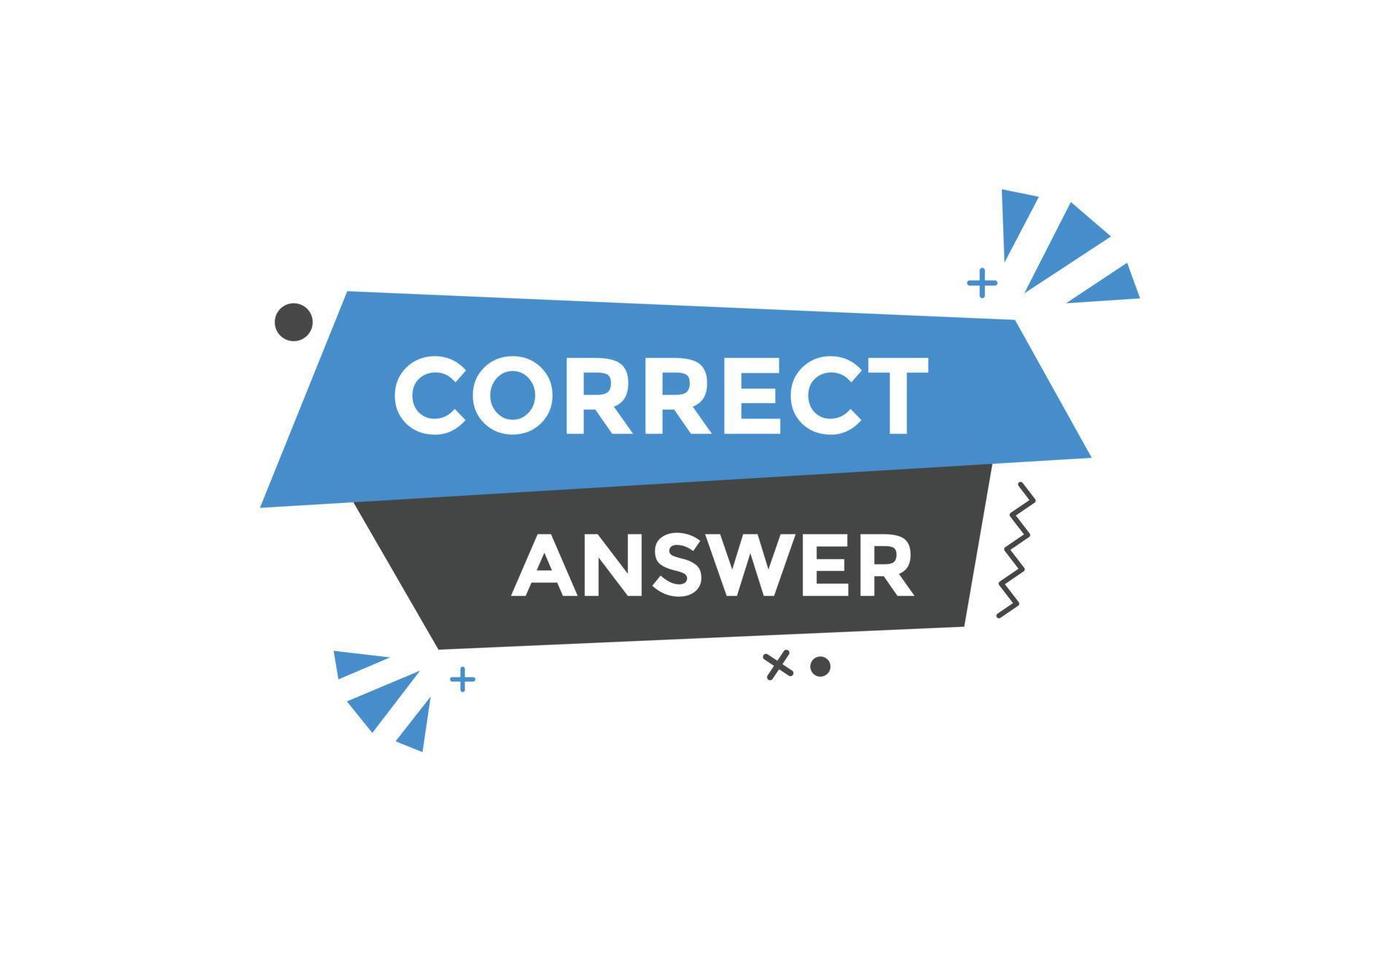 Correct answer text button.  Correct answer speech bubble. Correct answer banner label template. Vector Illustration